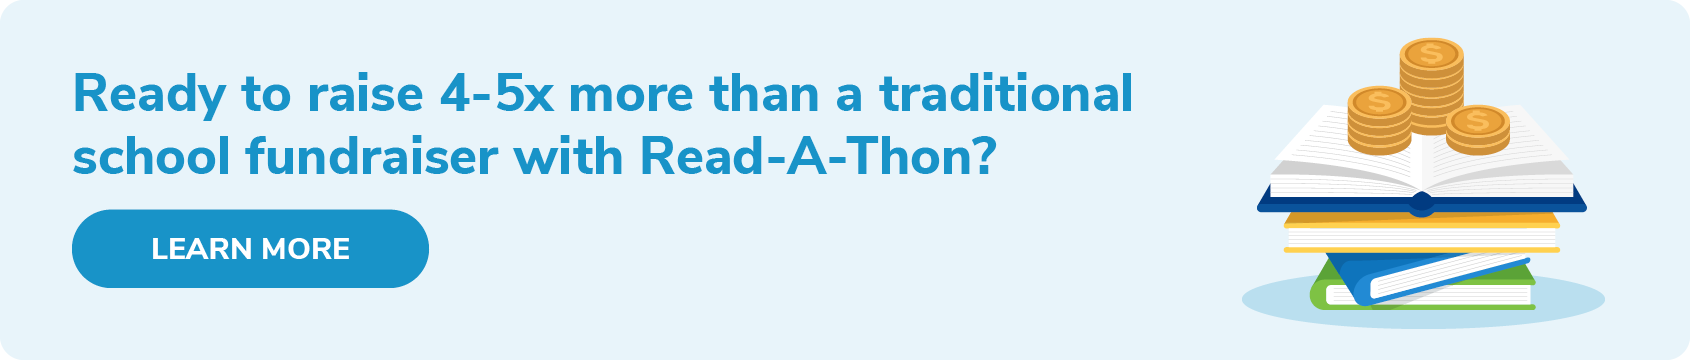 Click through to learn about Read-A-Thons, one of the top school fundraising ideas, and how you can raise 4-5x more than a traditional fundraiser.